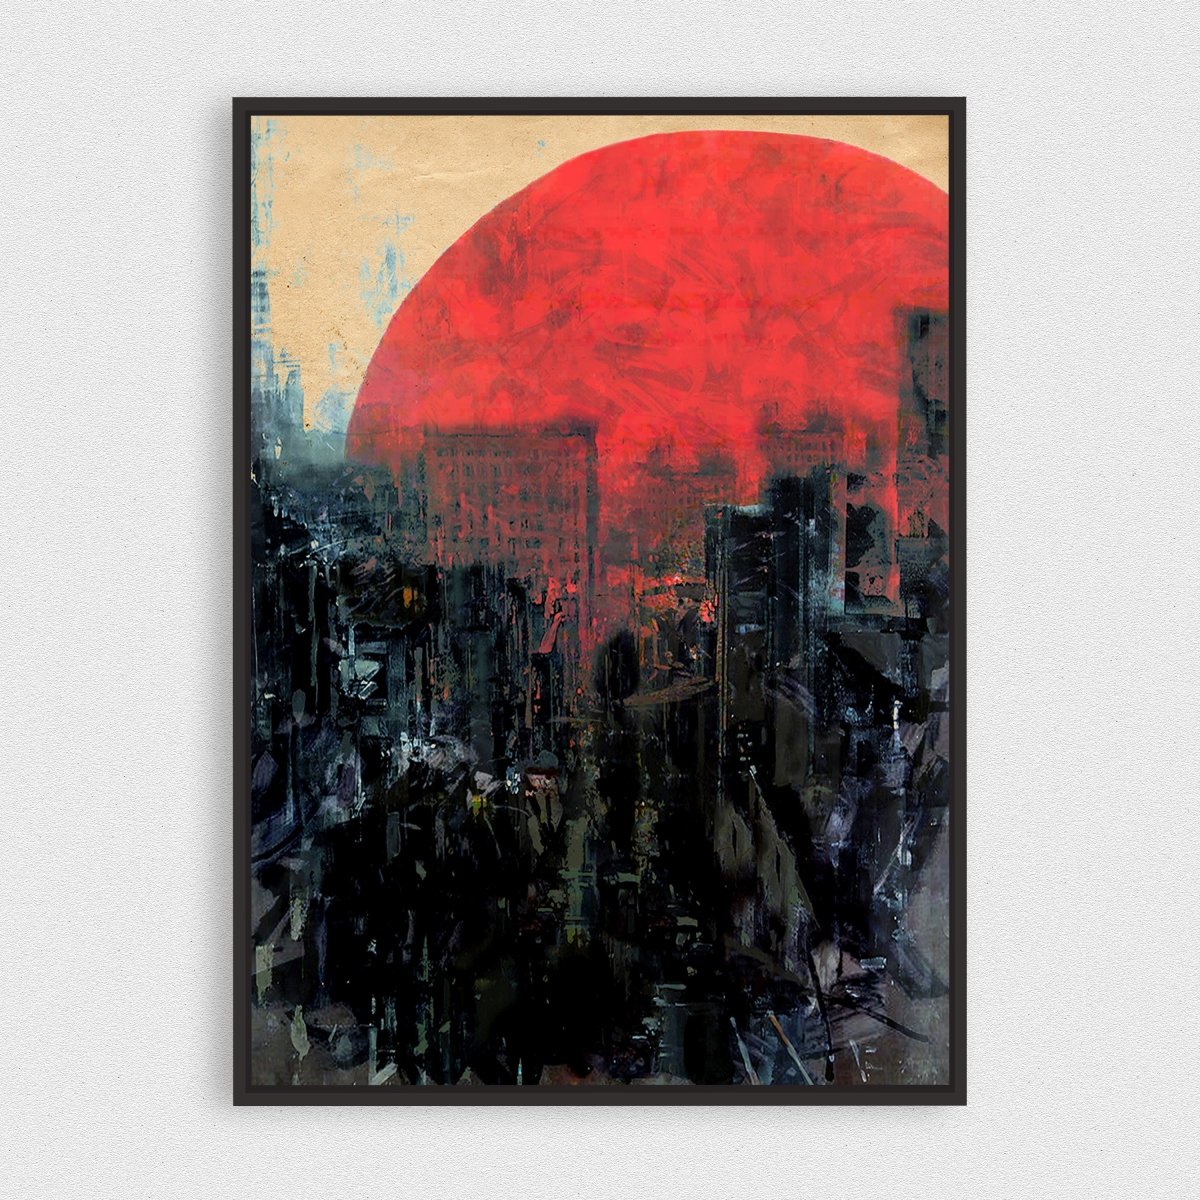 The Last Sunrise framed horizontal canvas wall art piece for sale at Vybe Interior